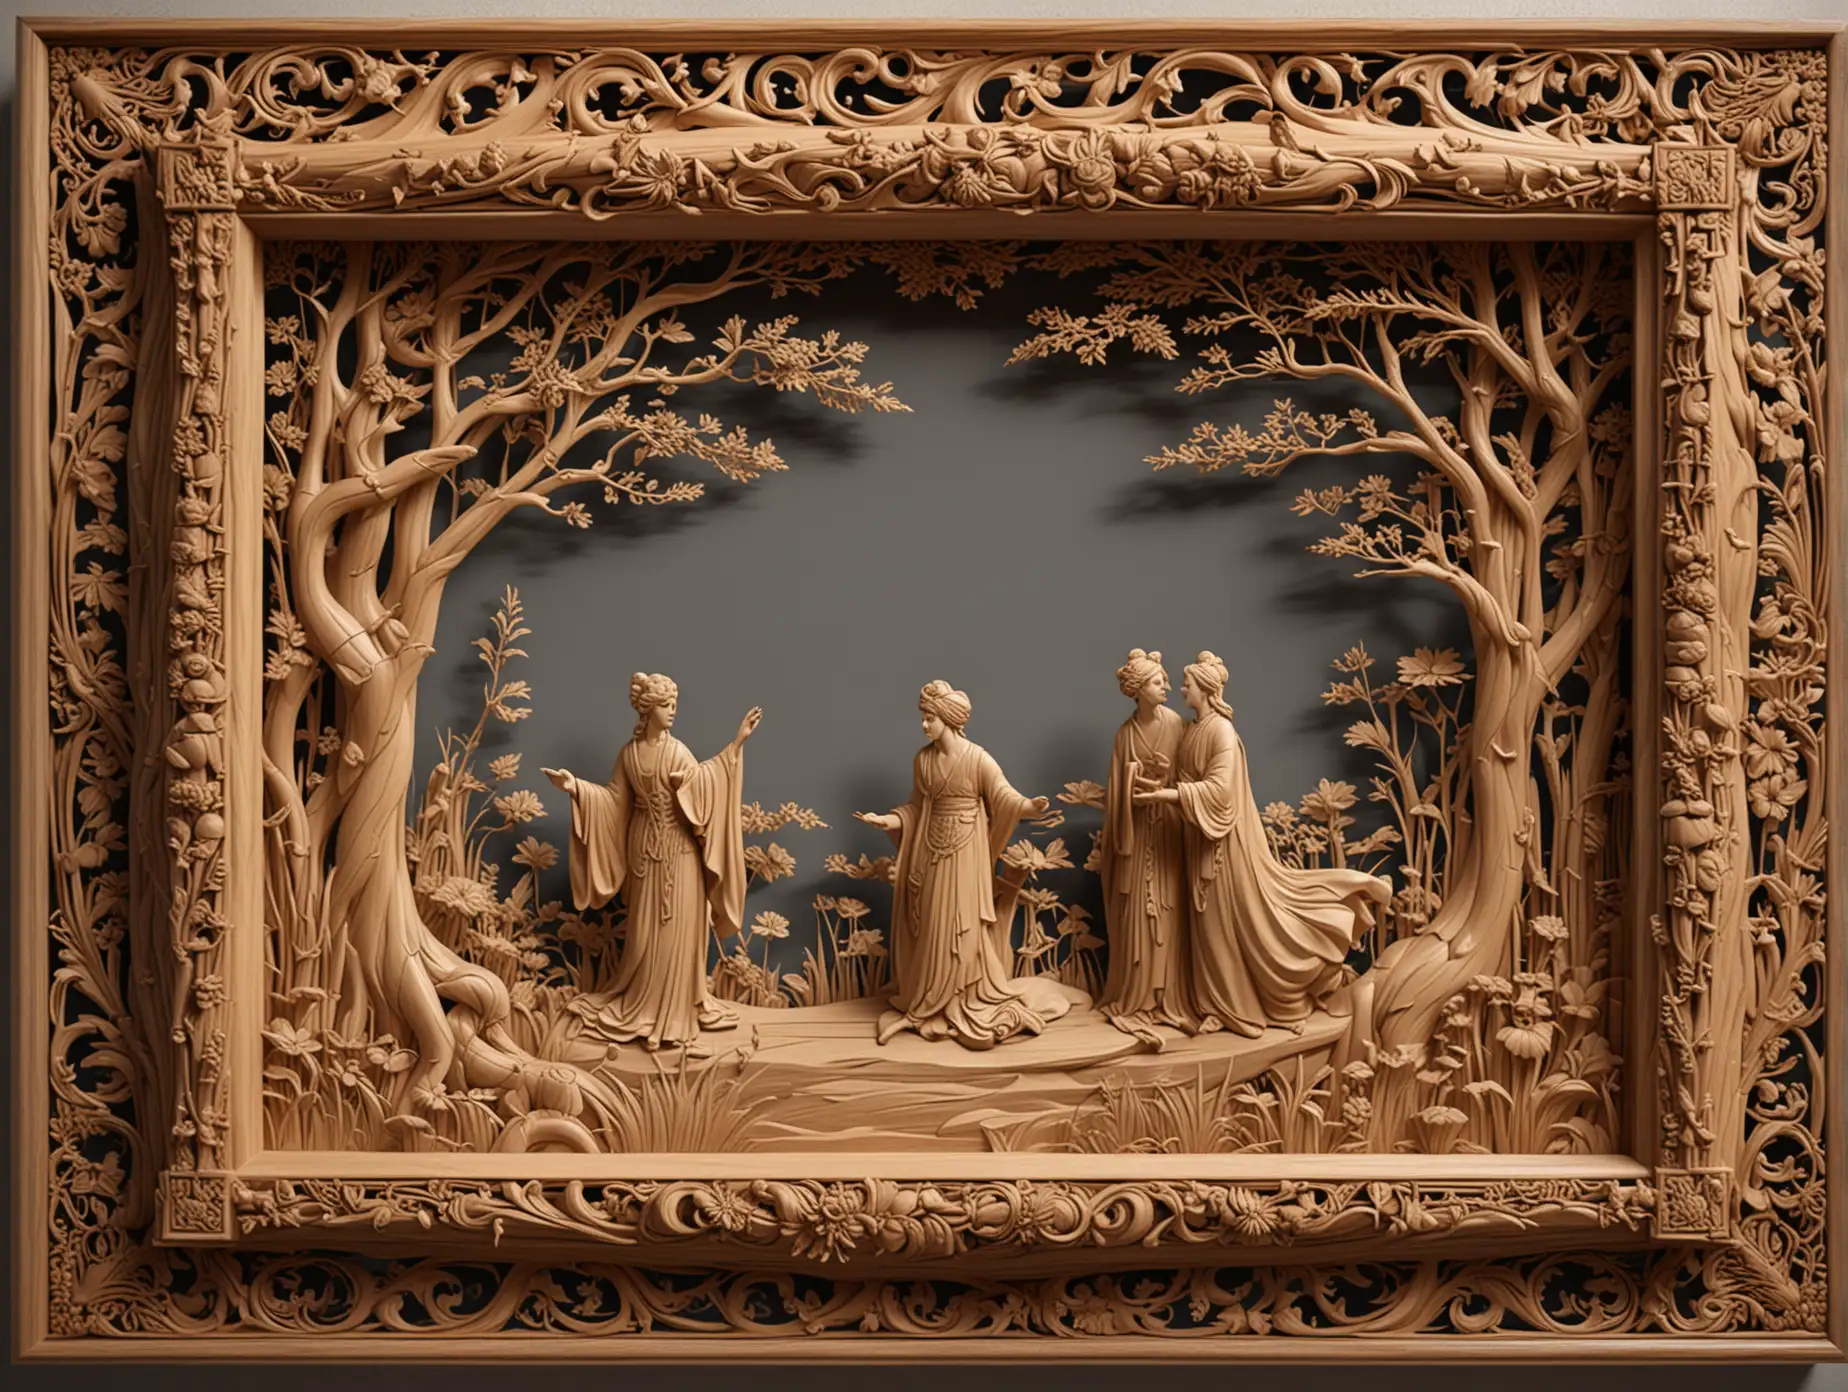 Aladdin-Wood-Carving-Intricately-Crafted-3D-Scene-in-Aubrey-Beardsley-Style